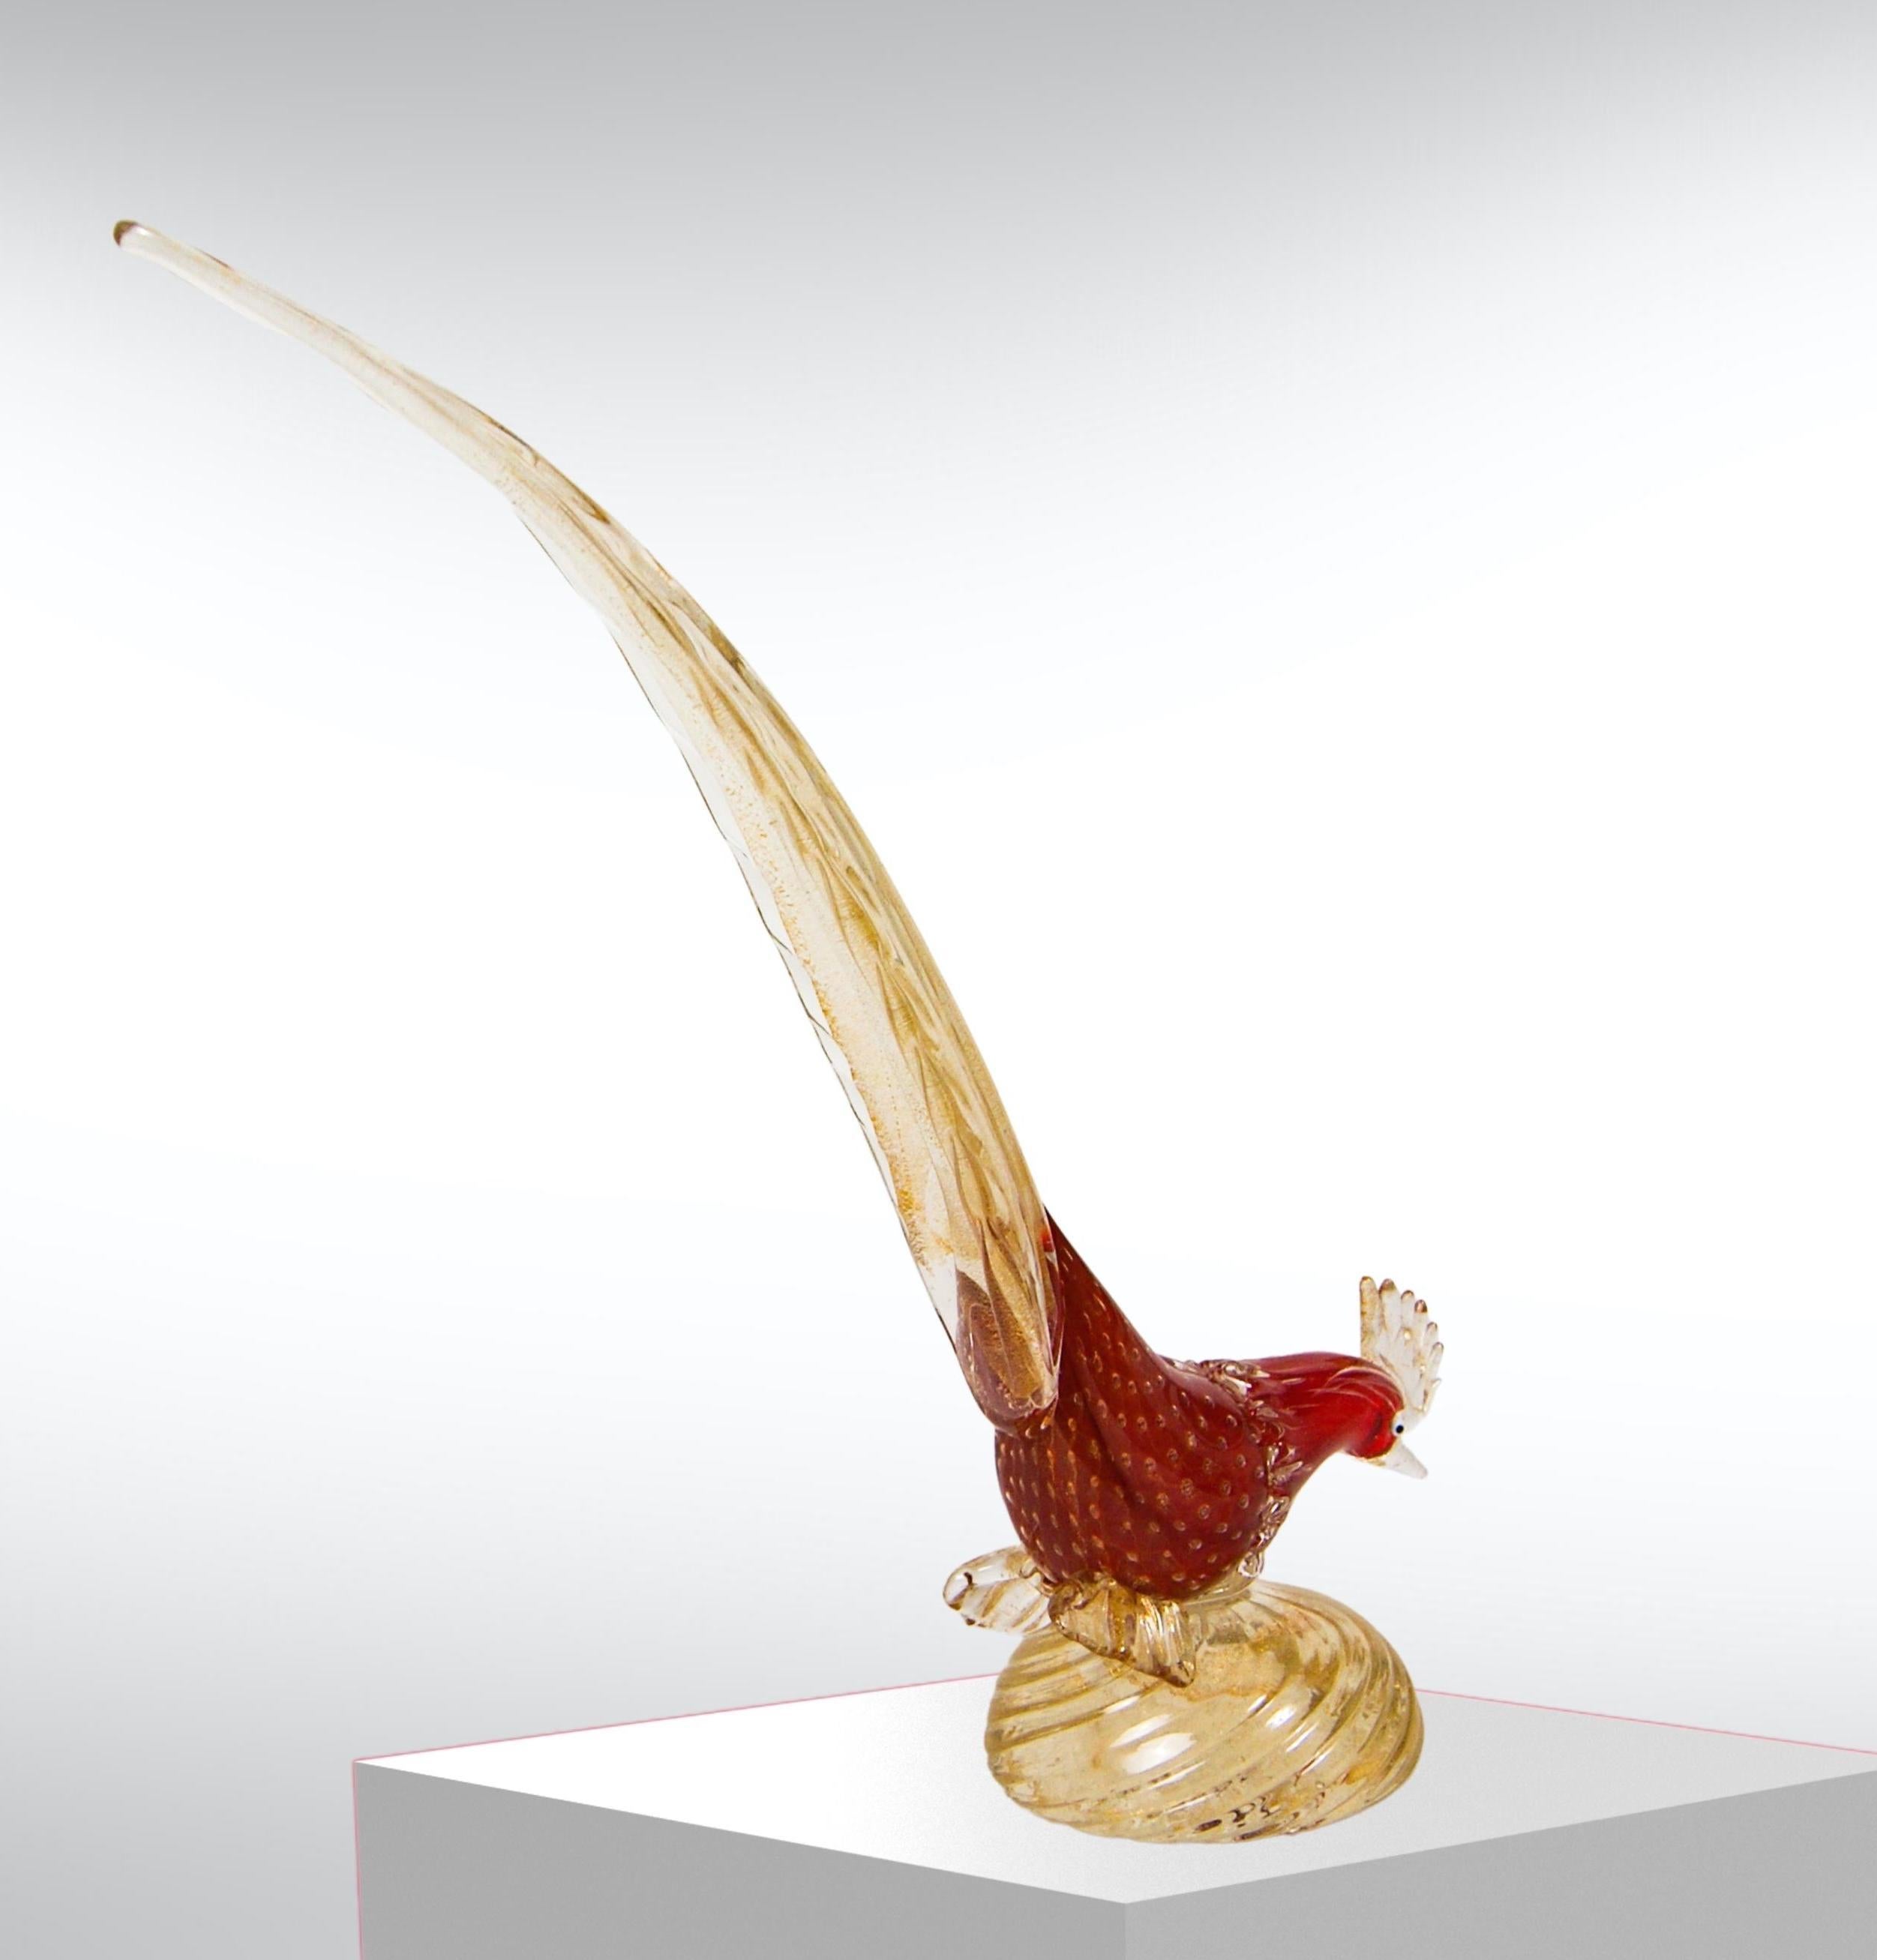 Vintage 1950s Murano glass bird sculpture.
Attributed to Barovier & Toso.
Elegant and tall glass Pheasant sculpture, in colour deep red with controlled bubbles and gold inclusion, all intricately submerged in a clear exterior. 
The bird perches